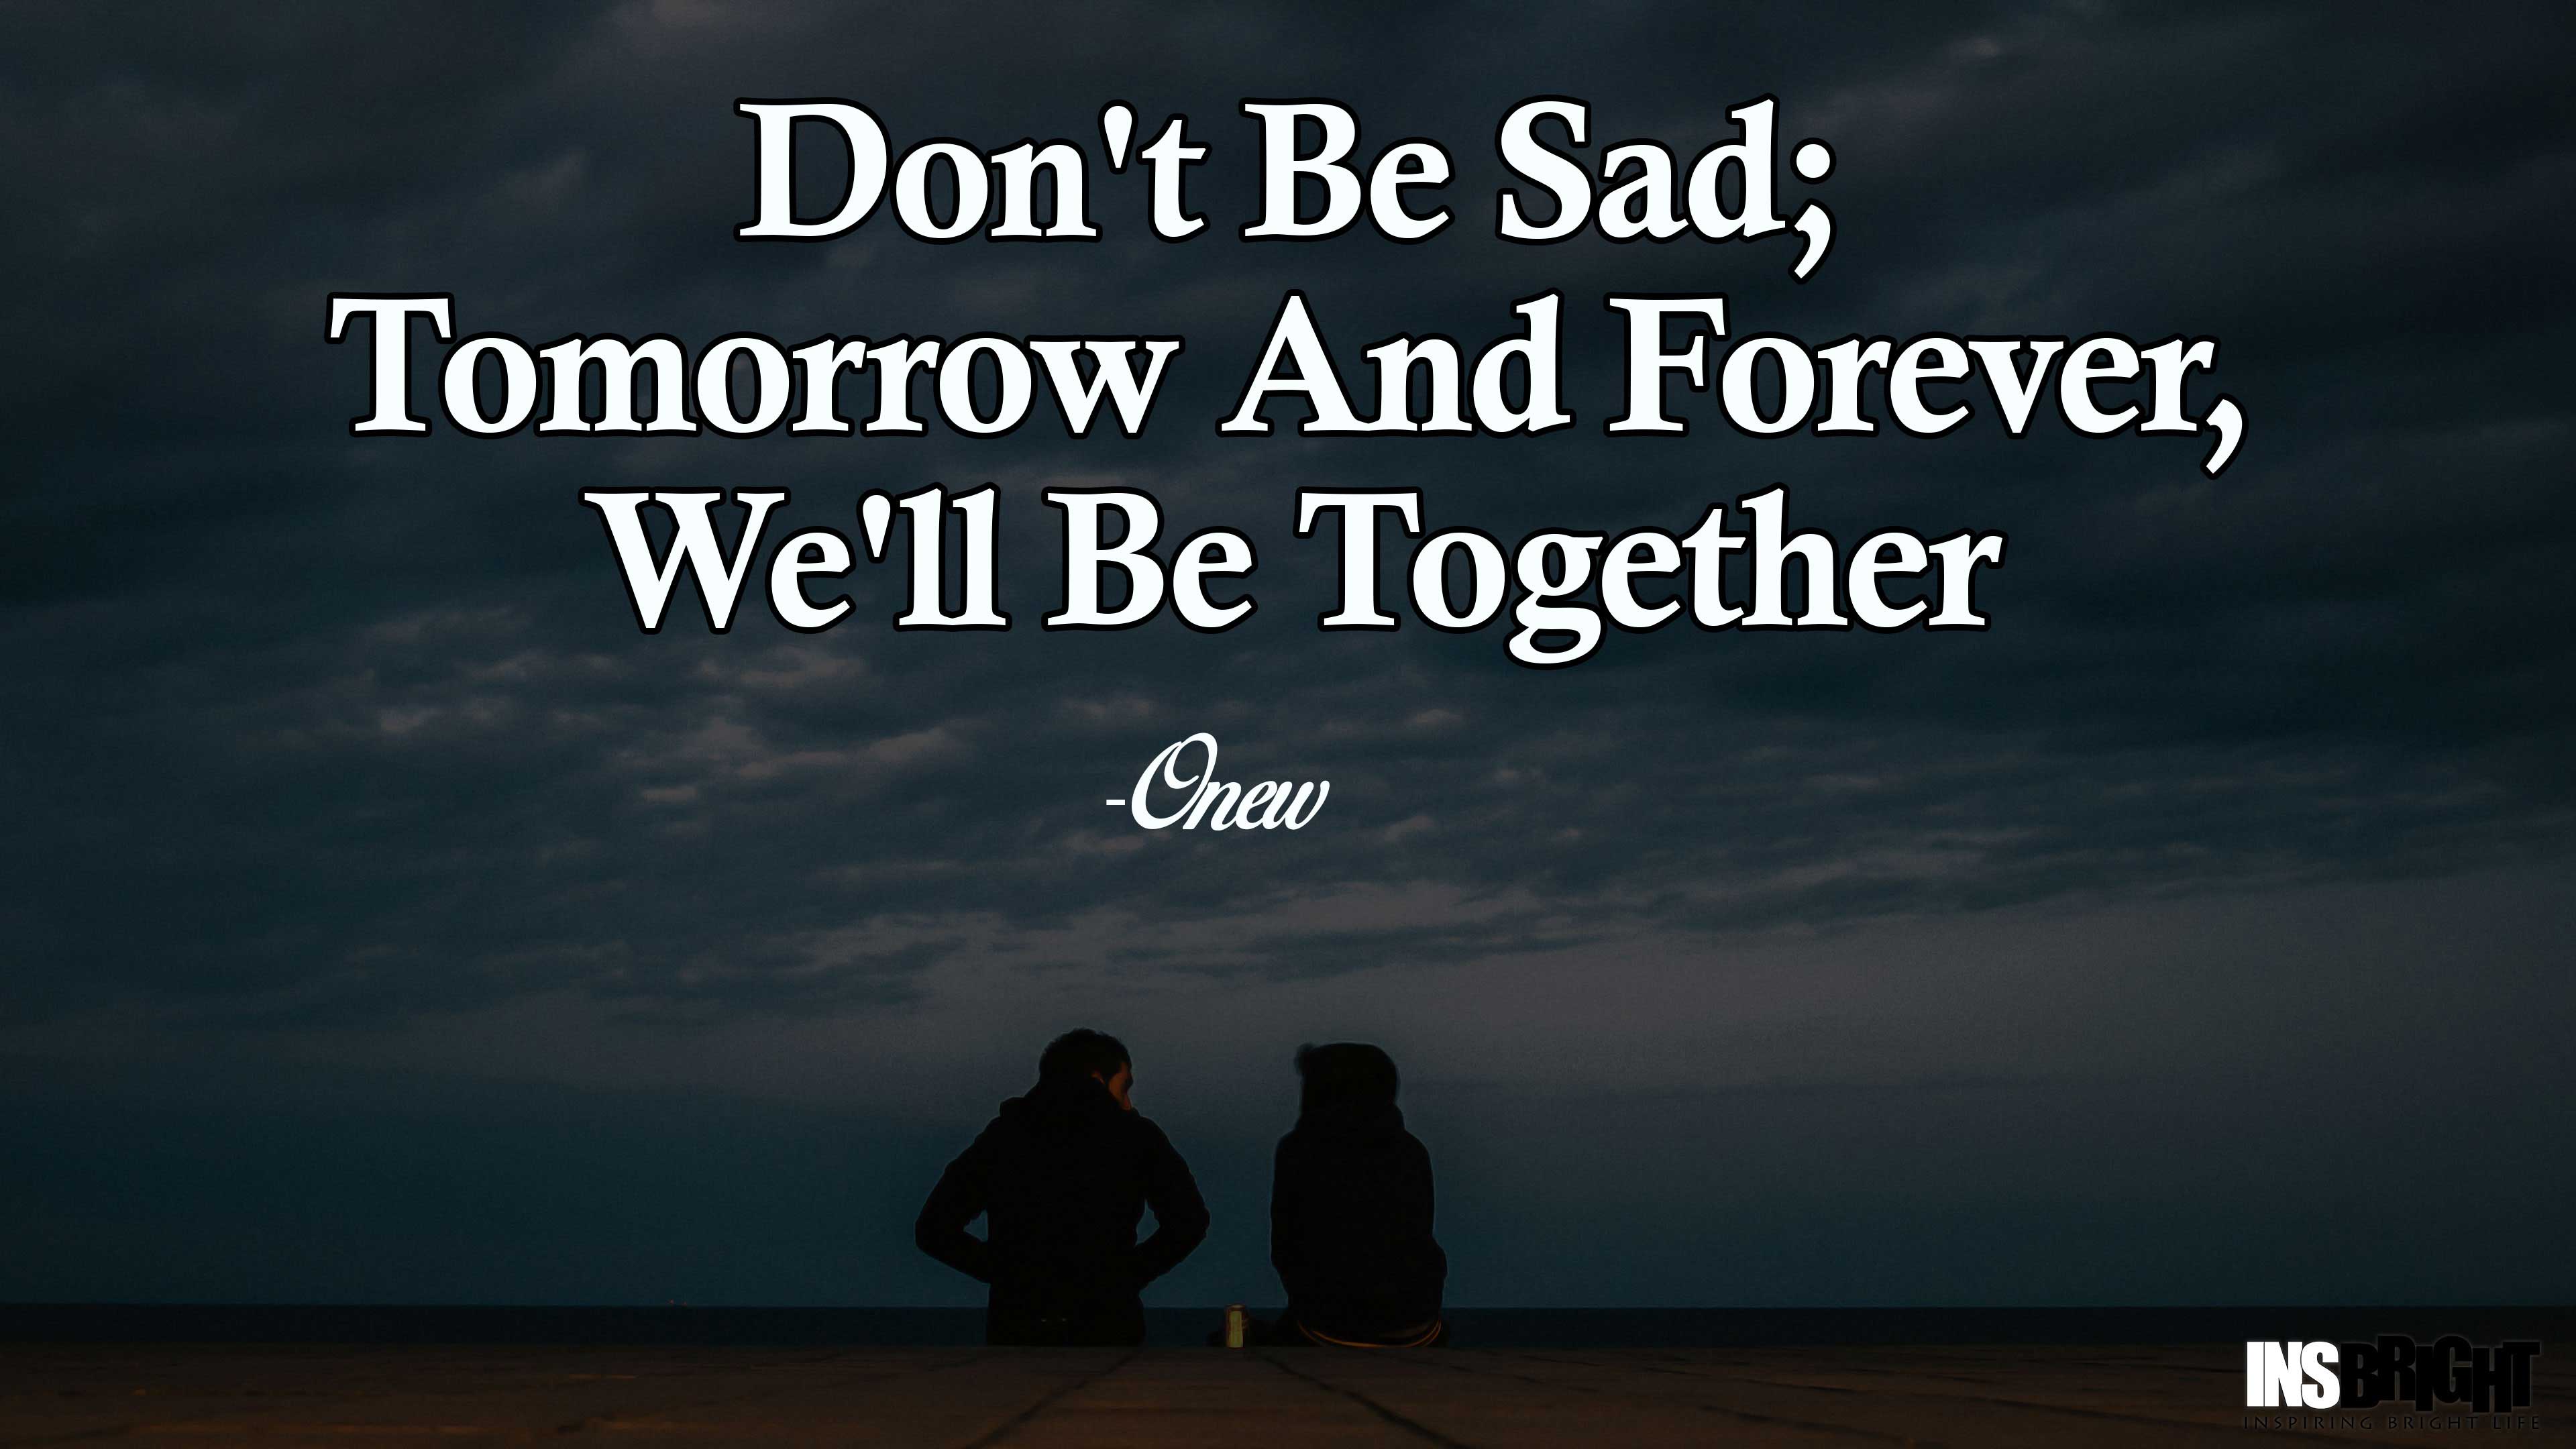 14+ Inspirational Don't Be Sad Quotes Images Insbright